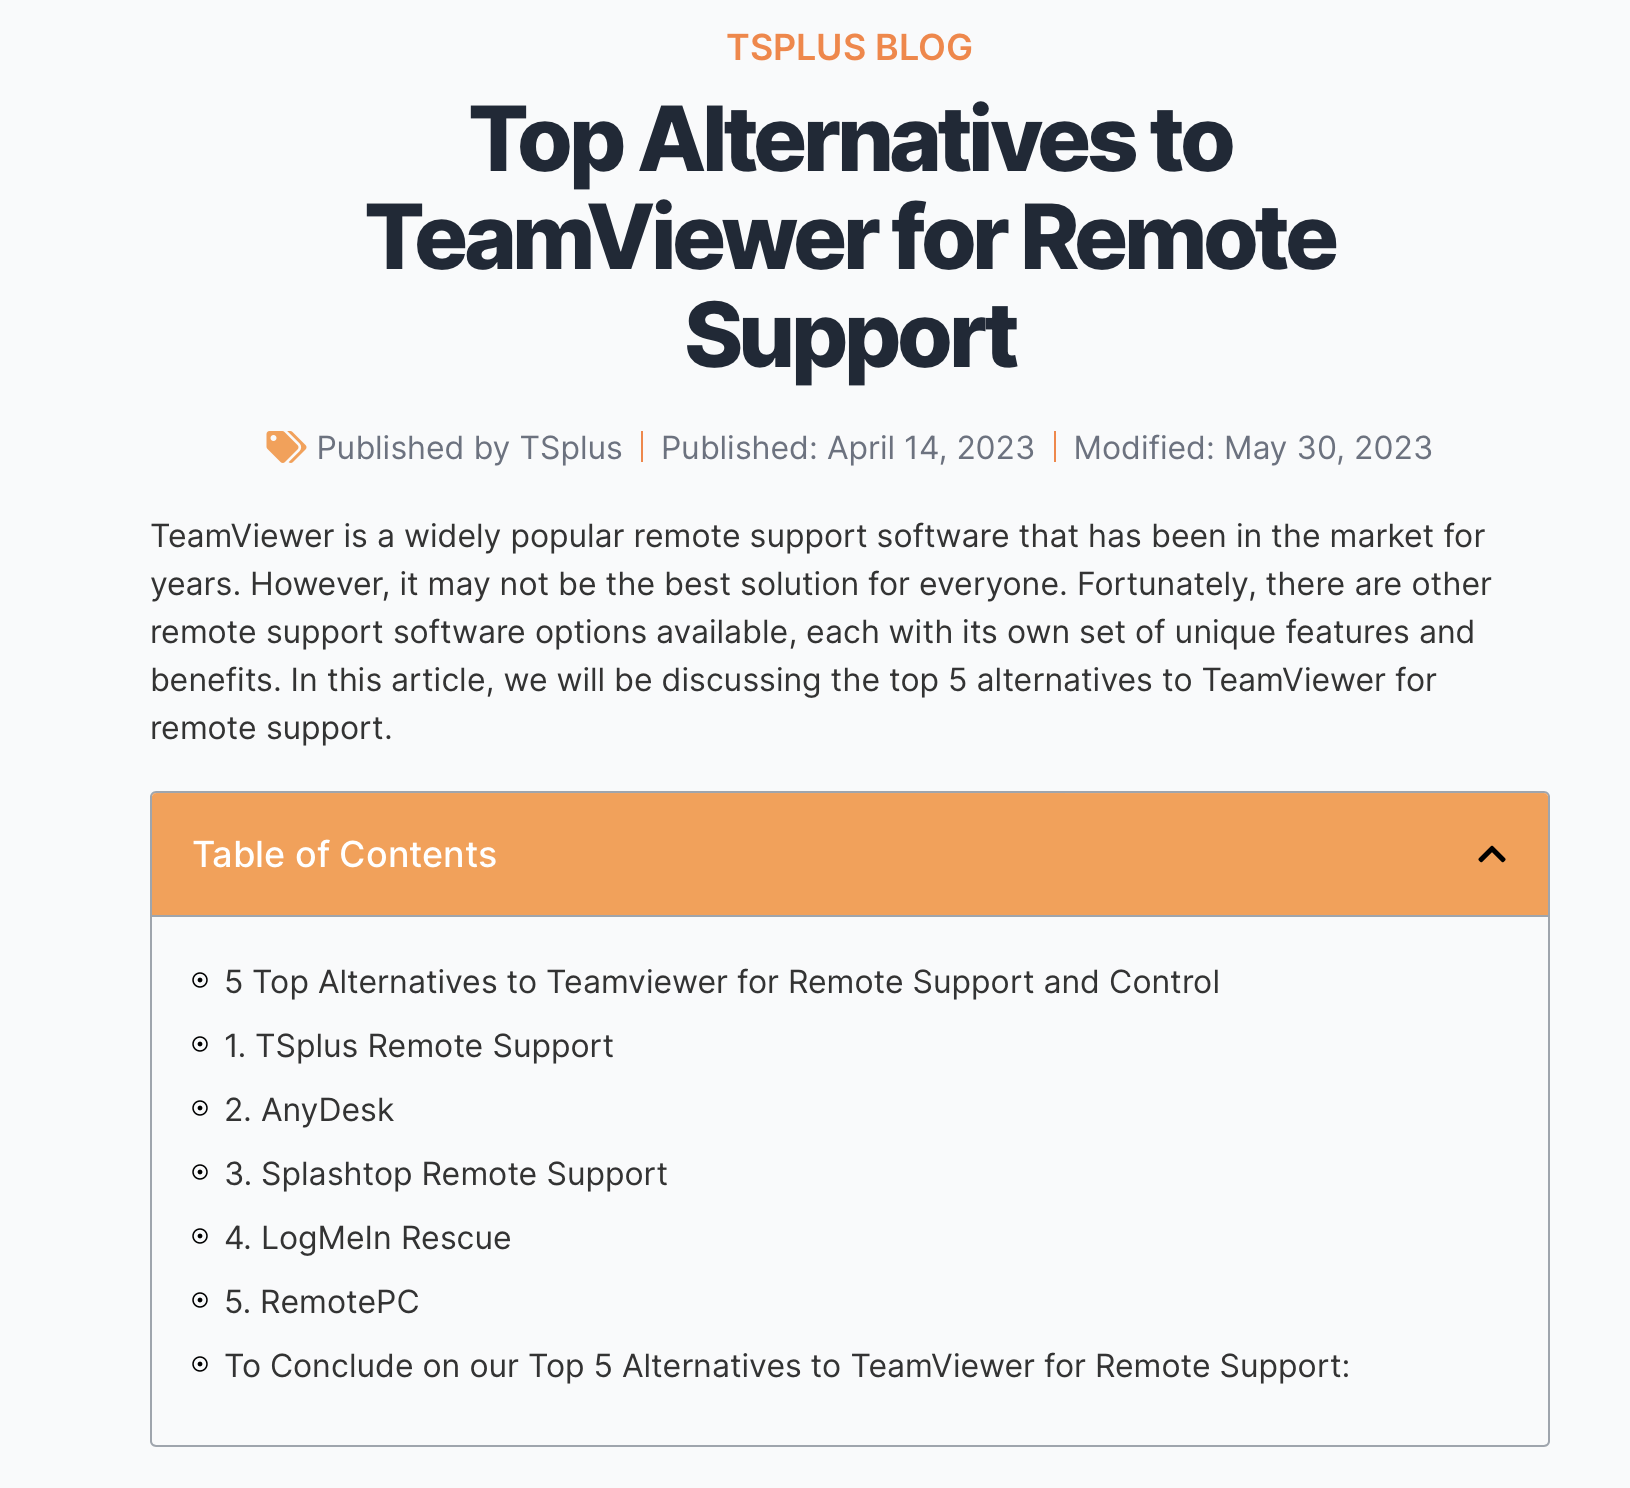 Top Alternatives to TeamViewer for Remote Support